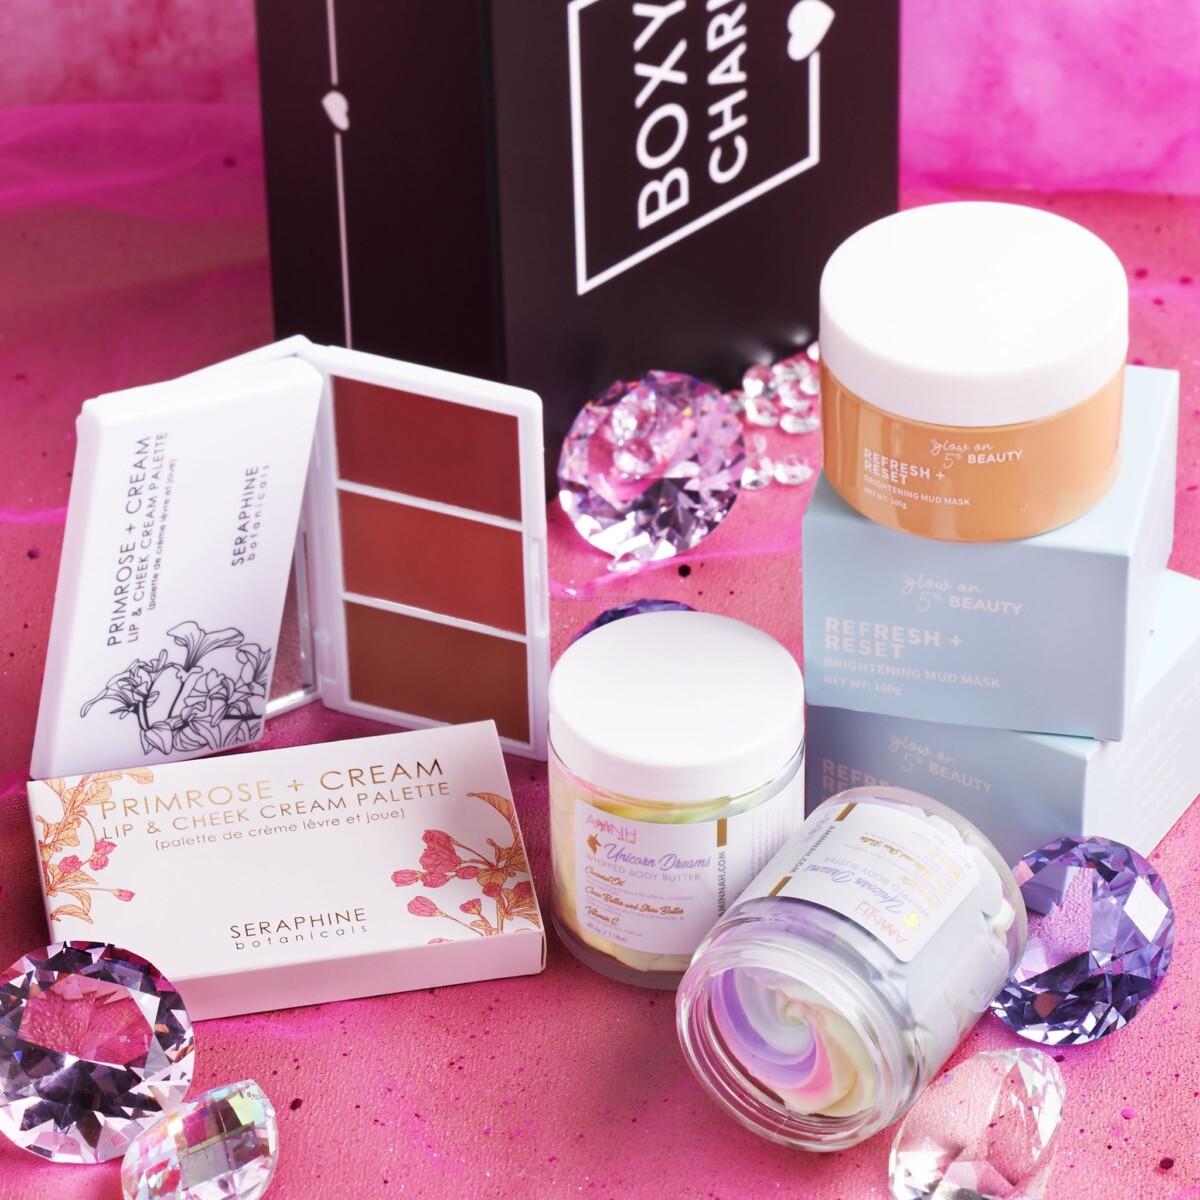 October Base products include Seraphine Botanicals Primrose + Cream Lip & Cheek Cream Palette, Glow on 5th Beauty Refresh + Reset Brightening Mud Mask, and AMNH SKIN CARE Skincare Unicorn Dreams Whipped Body Butter. 